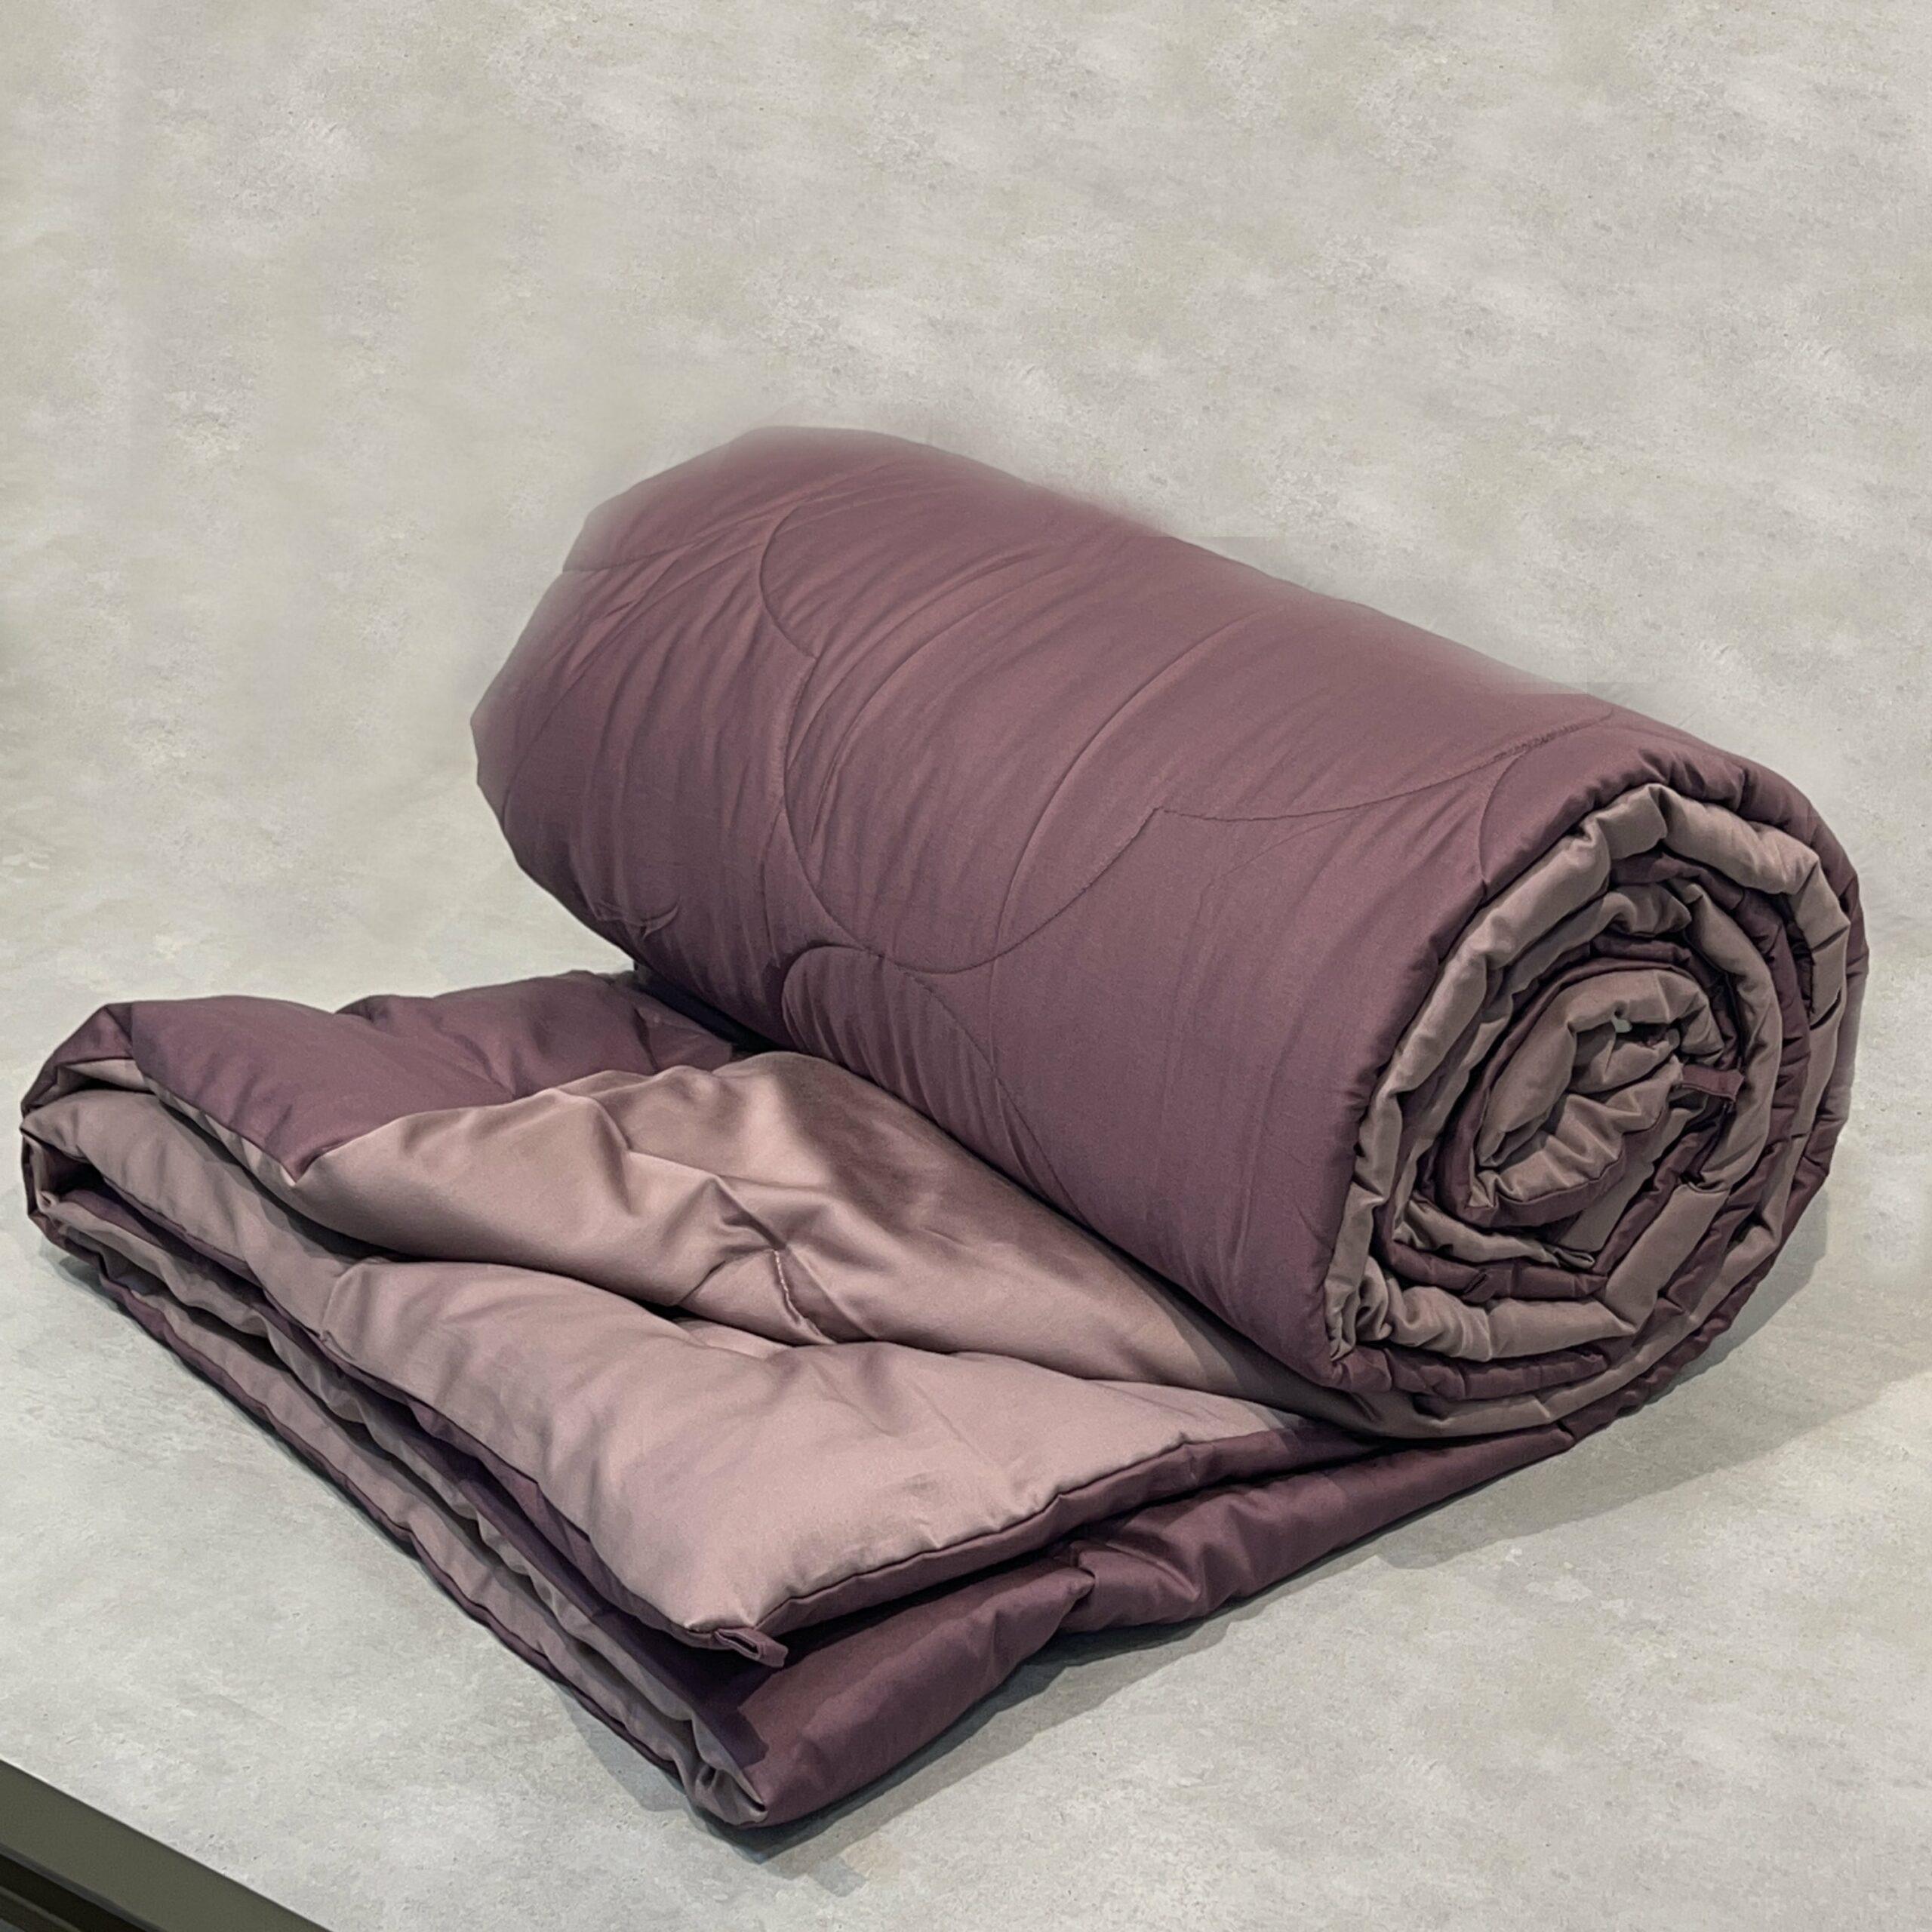 Old Rose and Mauve 300TC Cotton Reversible Downfill Quilt